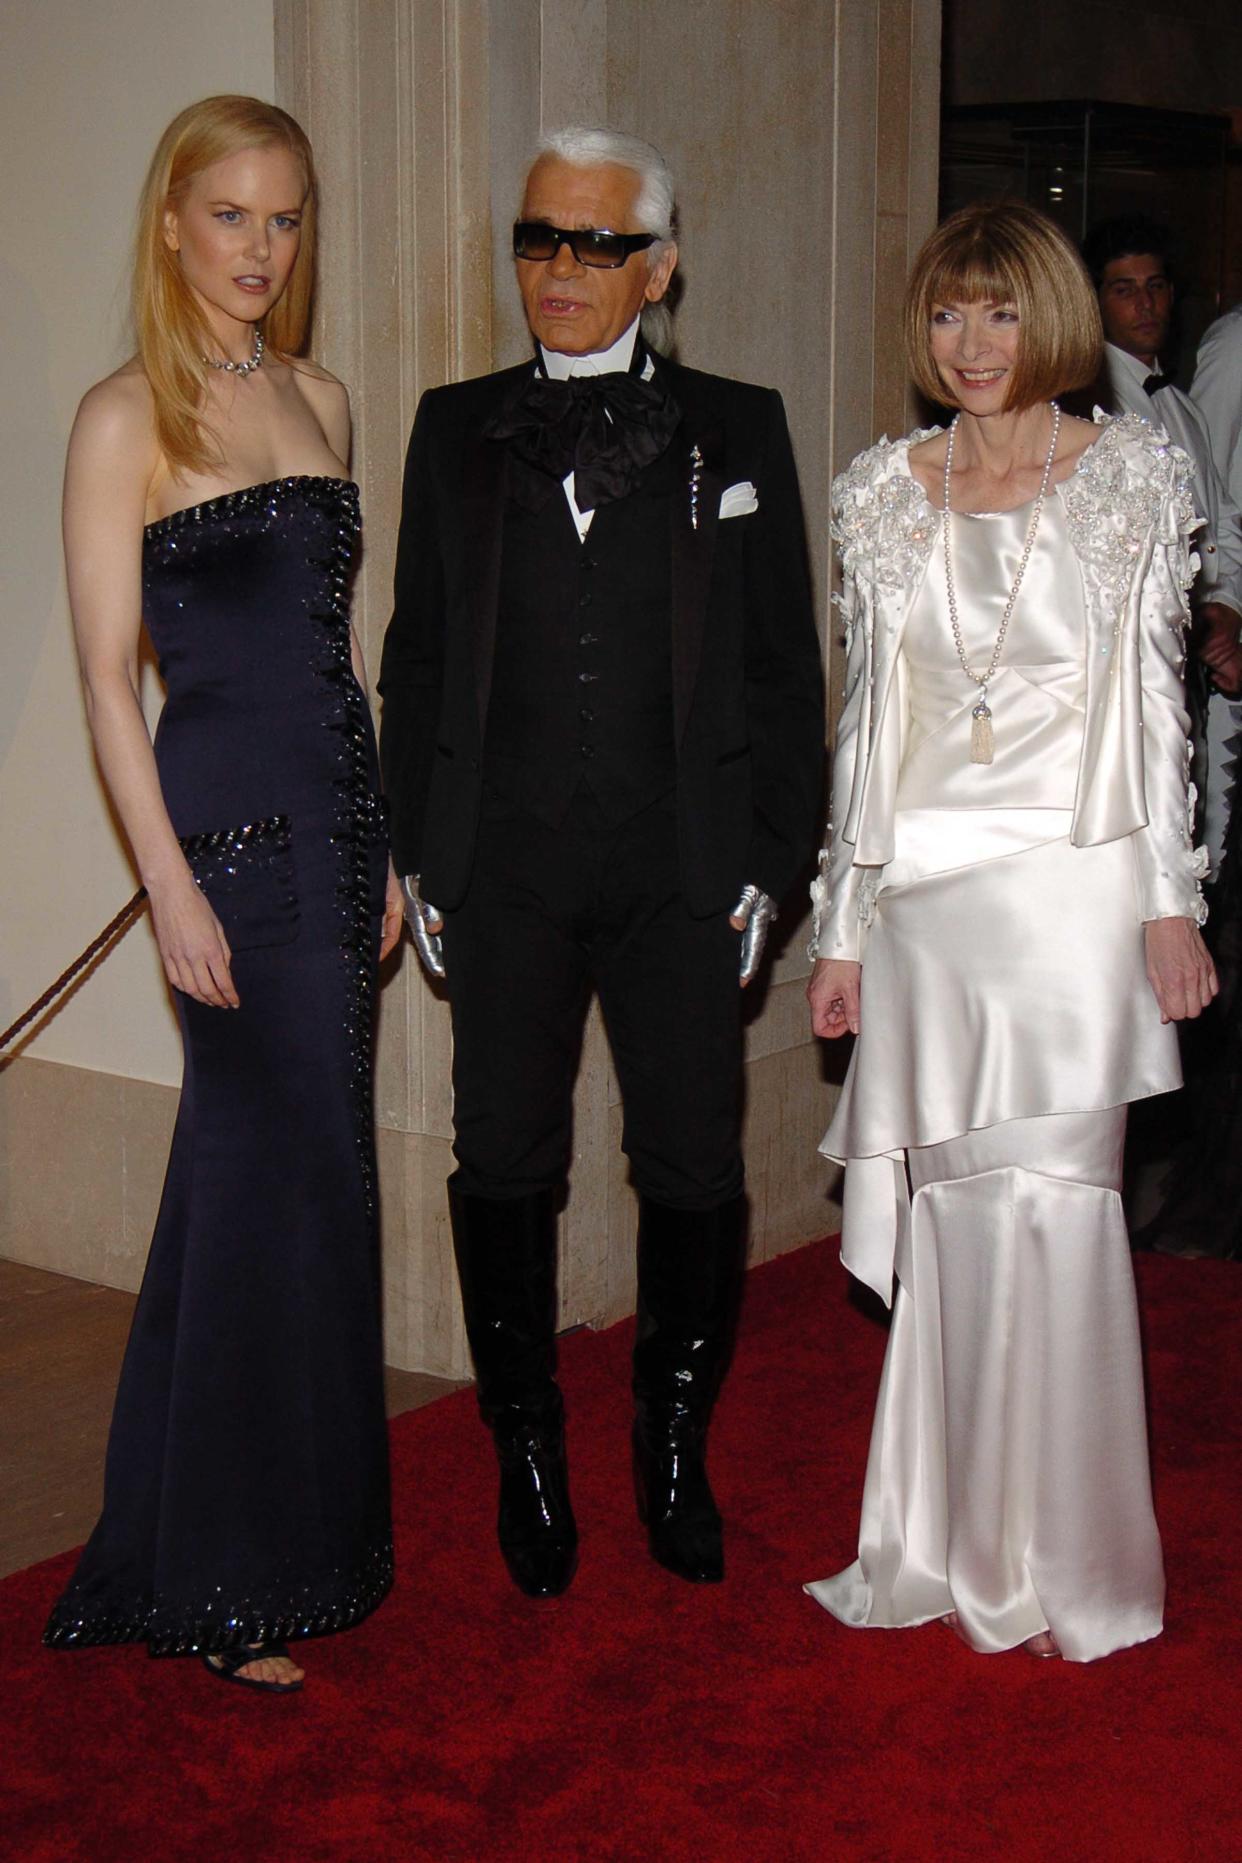 Nicole Kidman, Karl Lagerfeld, and Anna Wintour pose on the red carpet.